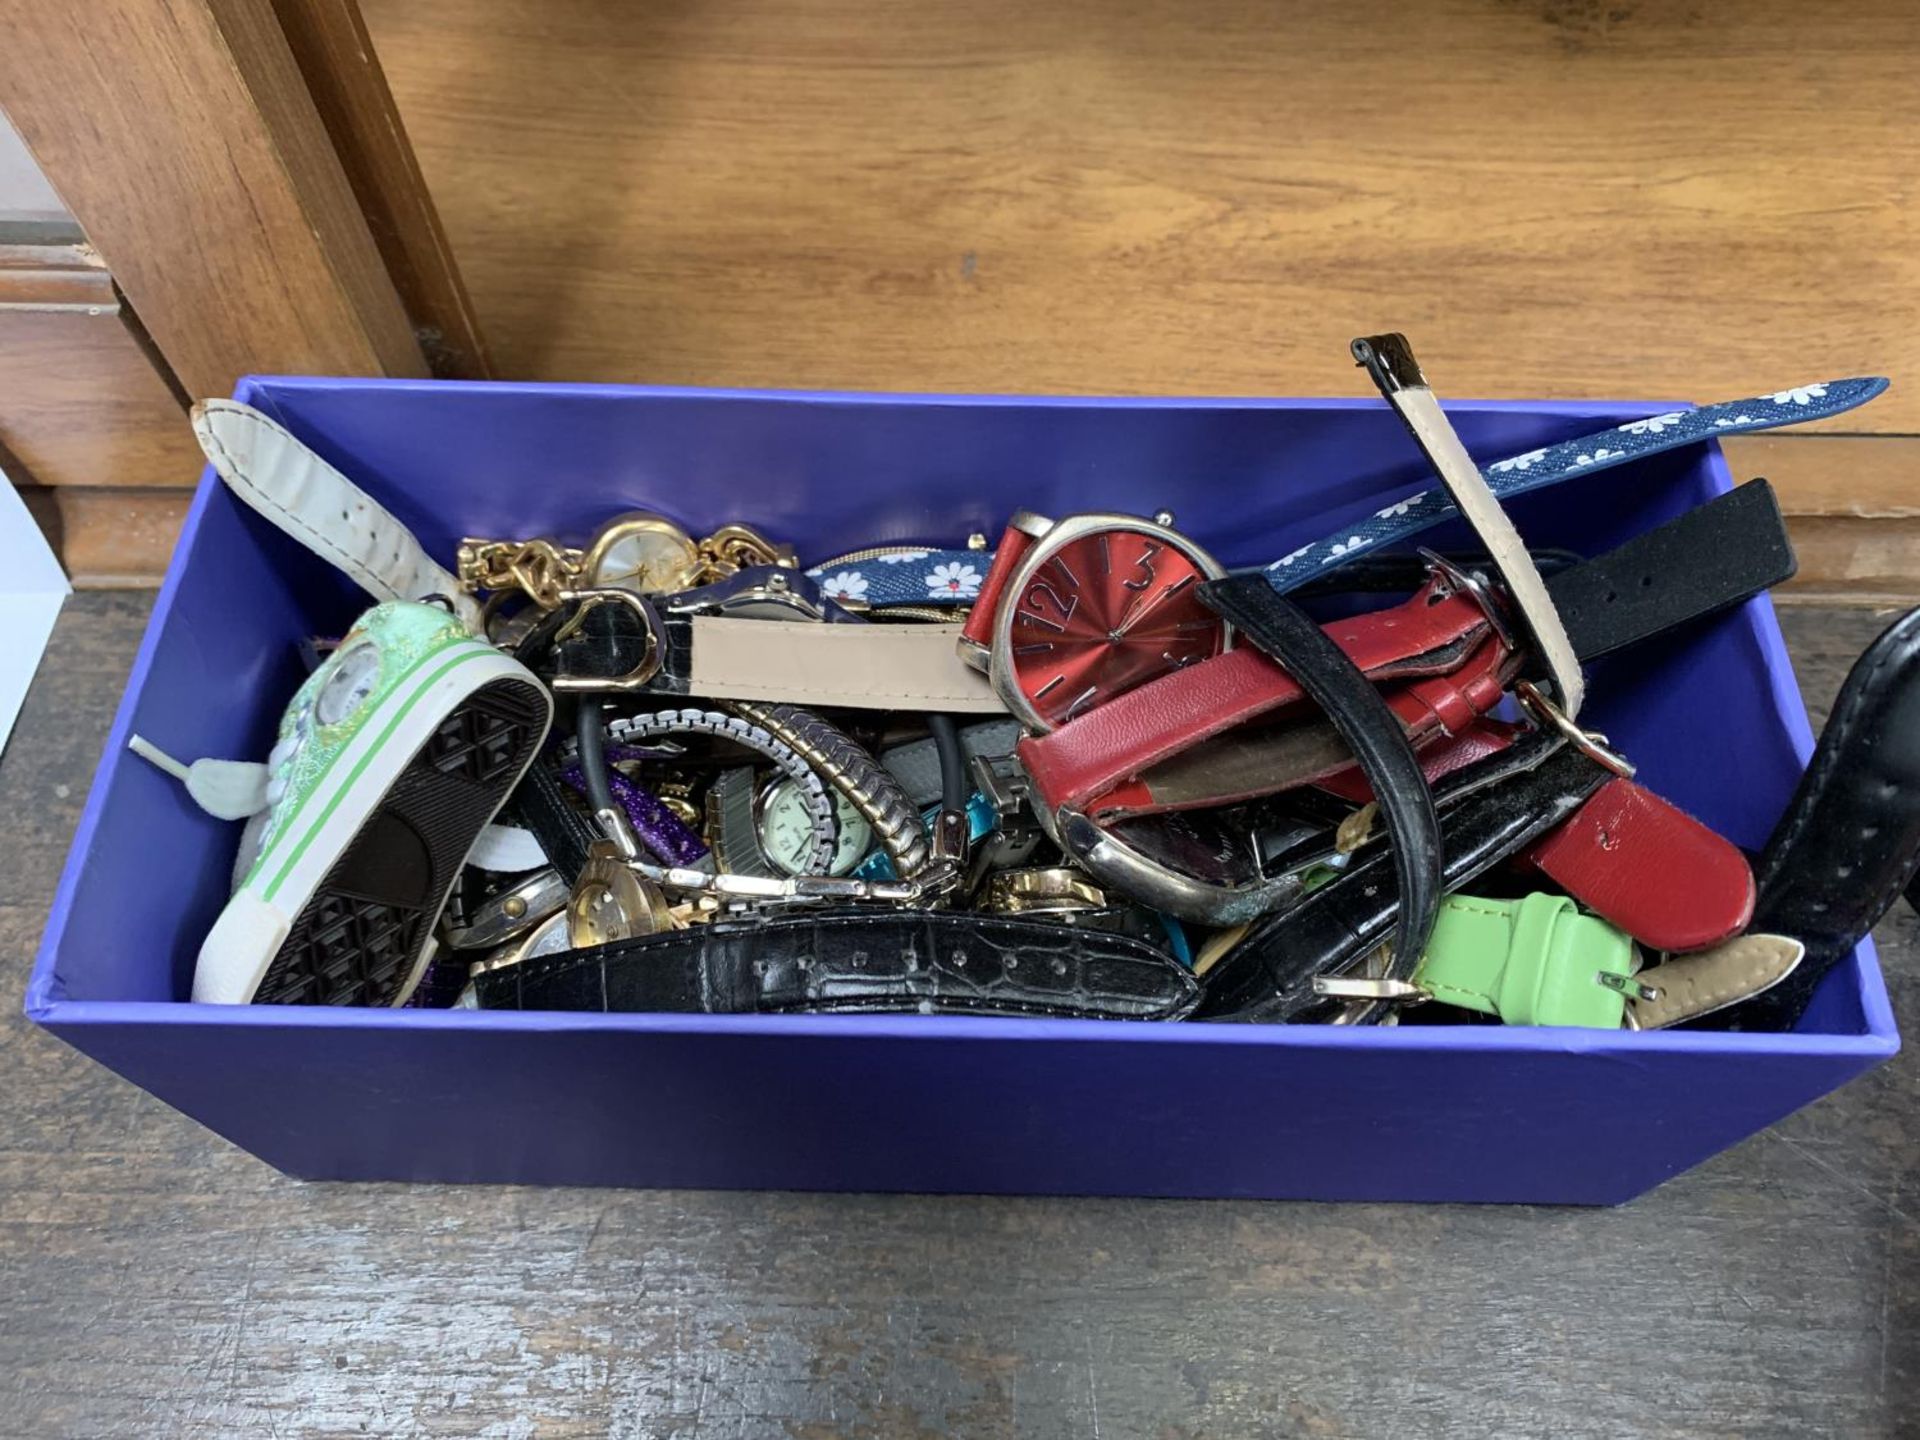 A BOX CONTAINING VARIOUS WRIST WATCHES